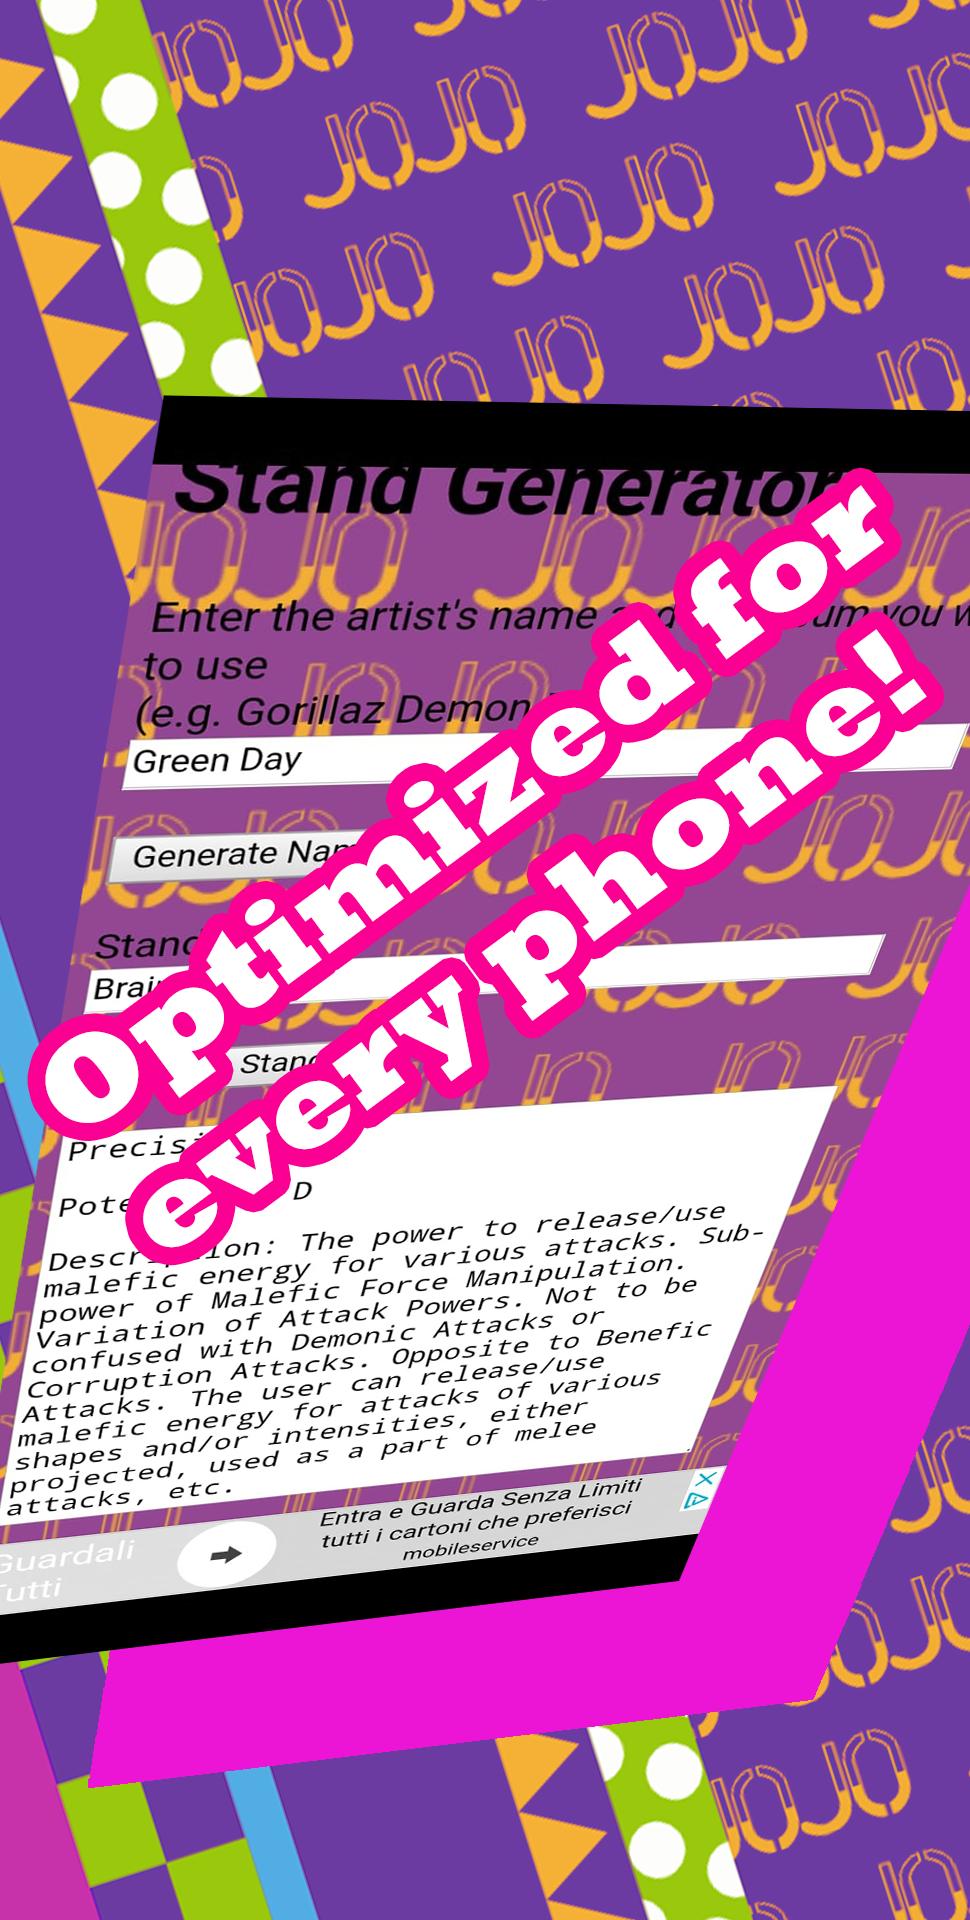 JoJo Stand Generator for Android - APK Download